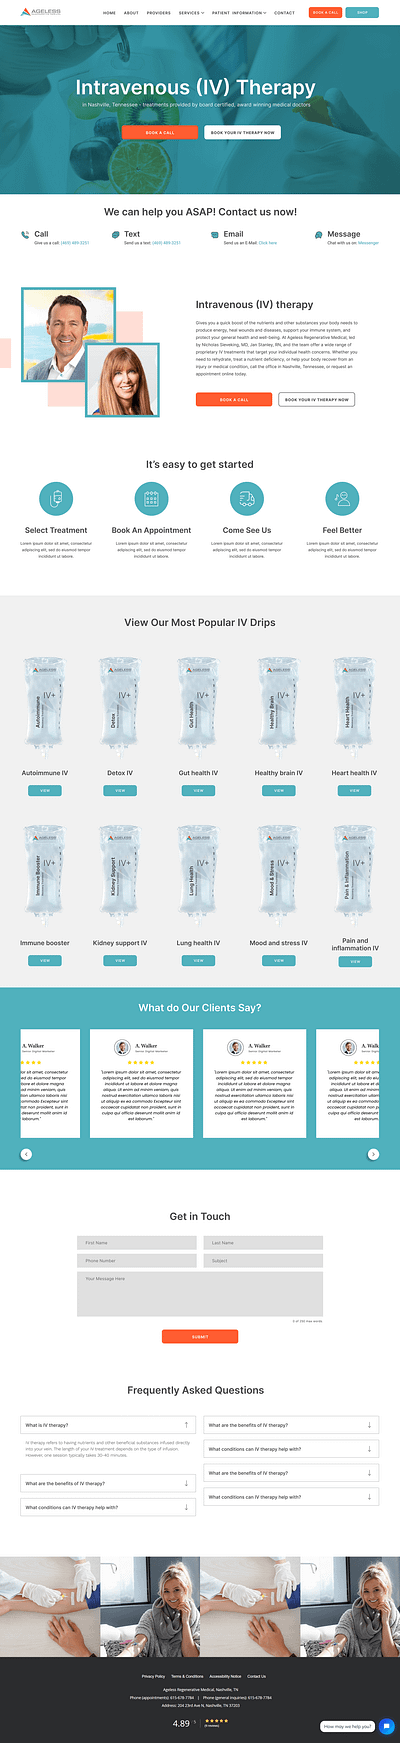 Mobile IV Therapy Landing Page Design ui ux